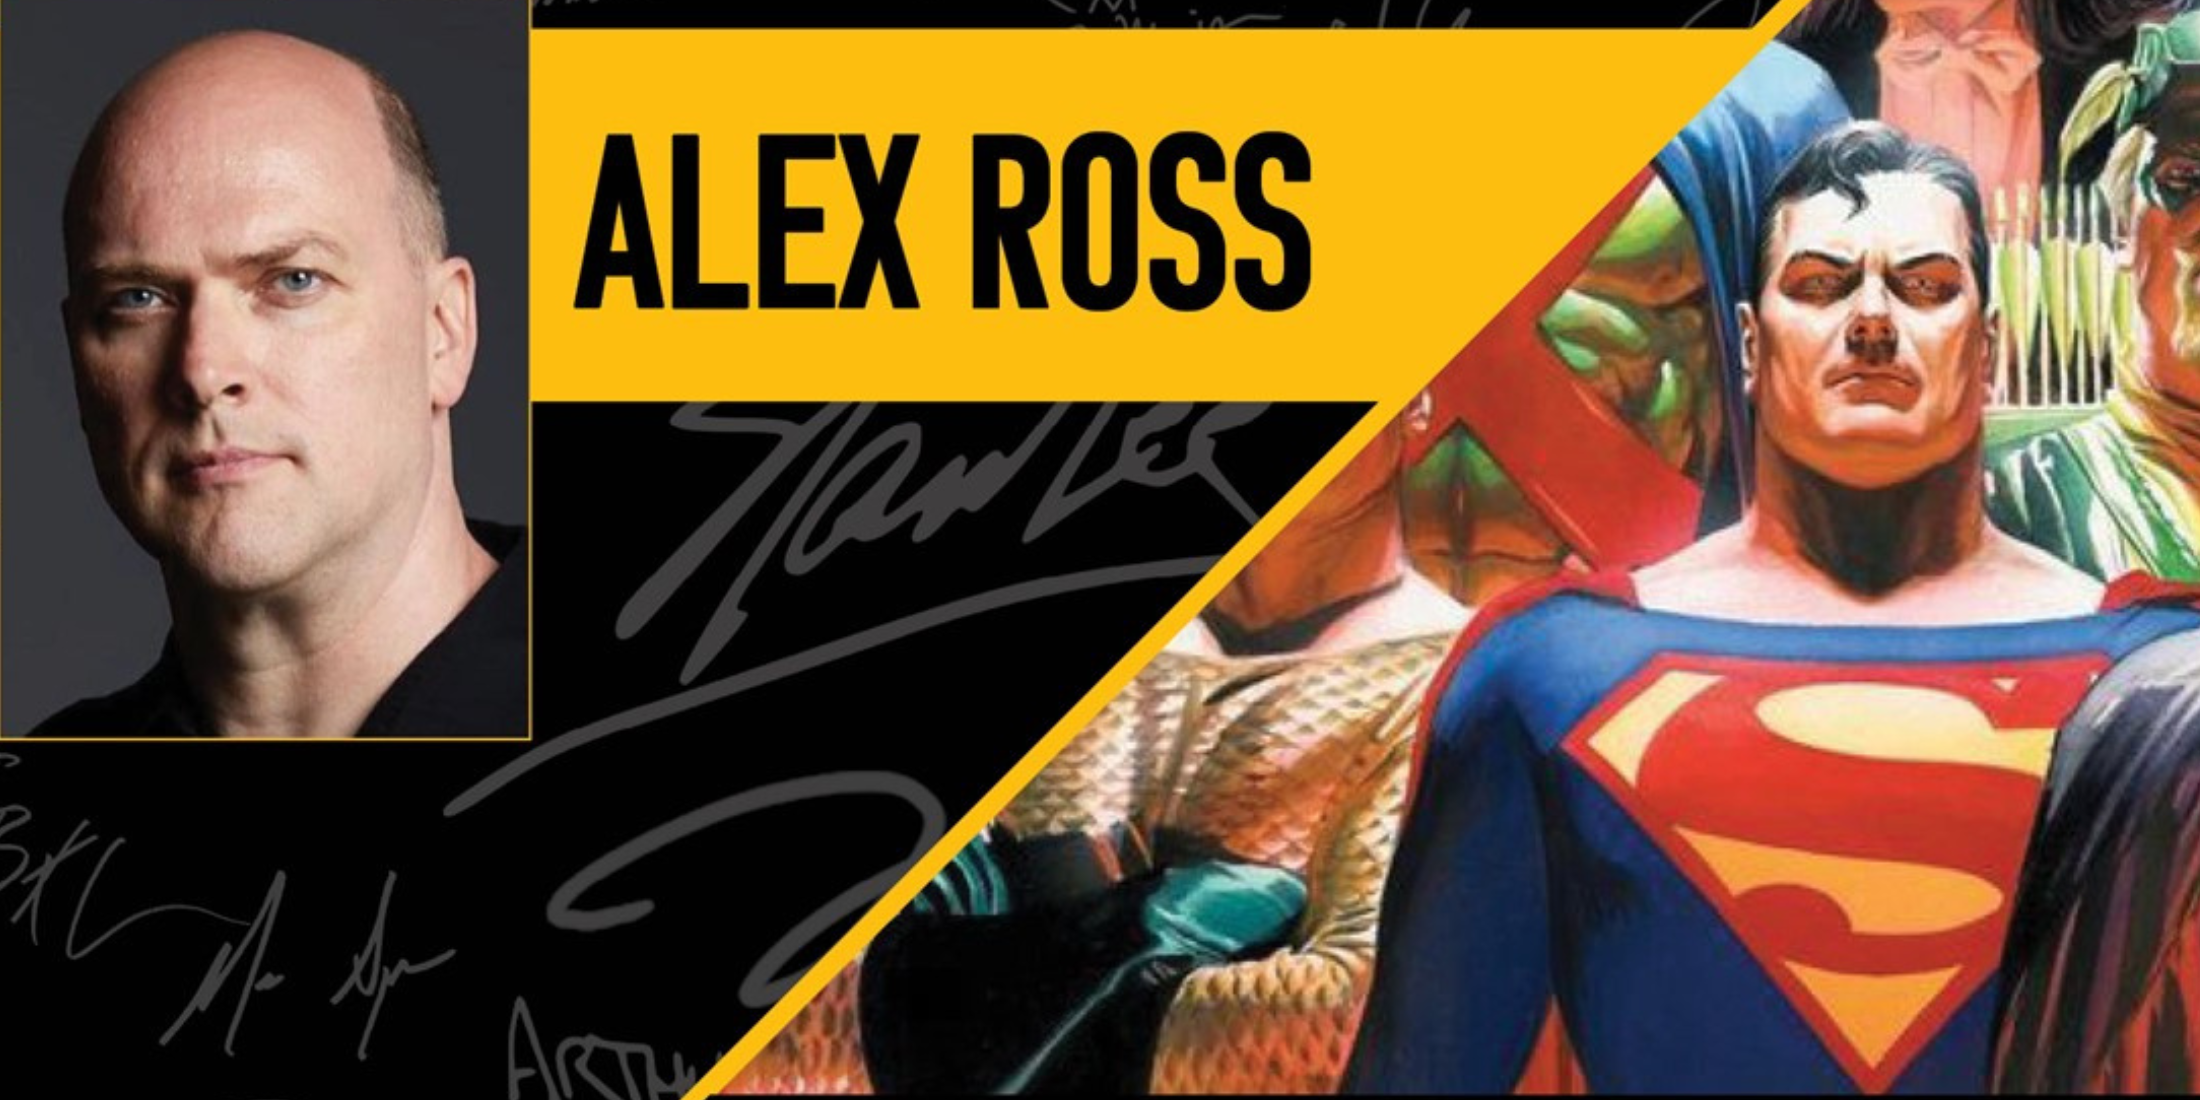 Alex Ross Teams Up with CGC for First-Ever Private Signing